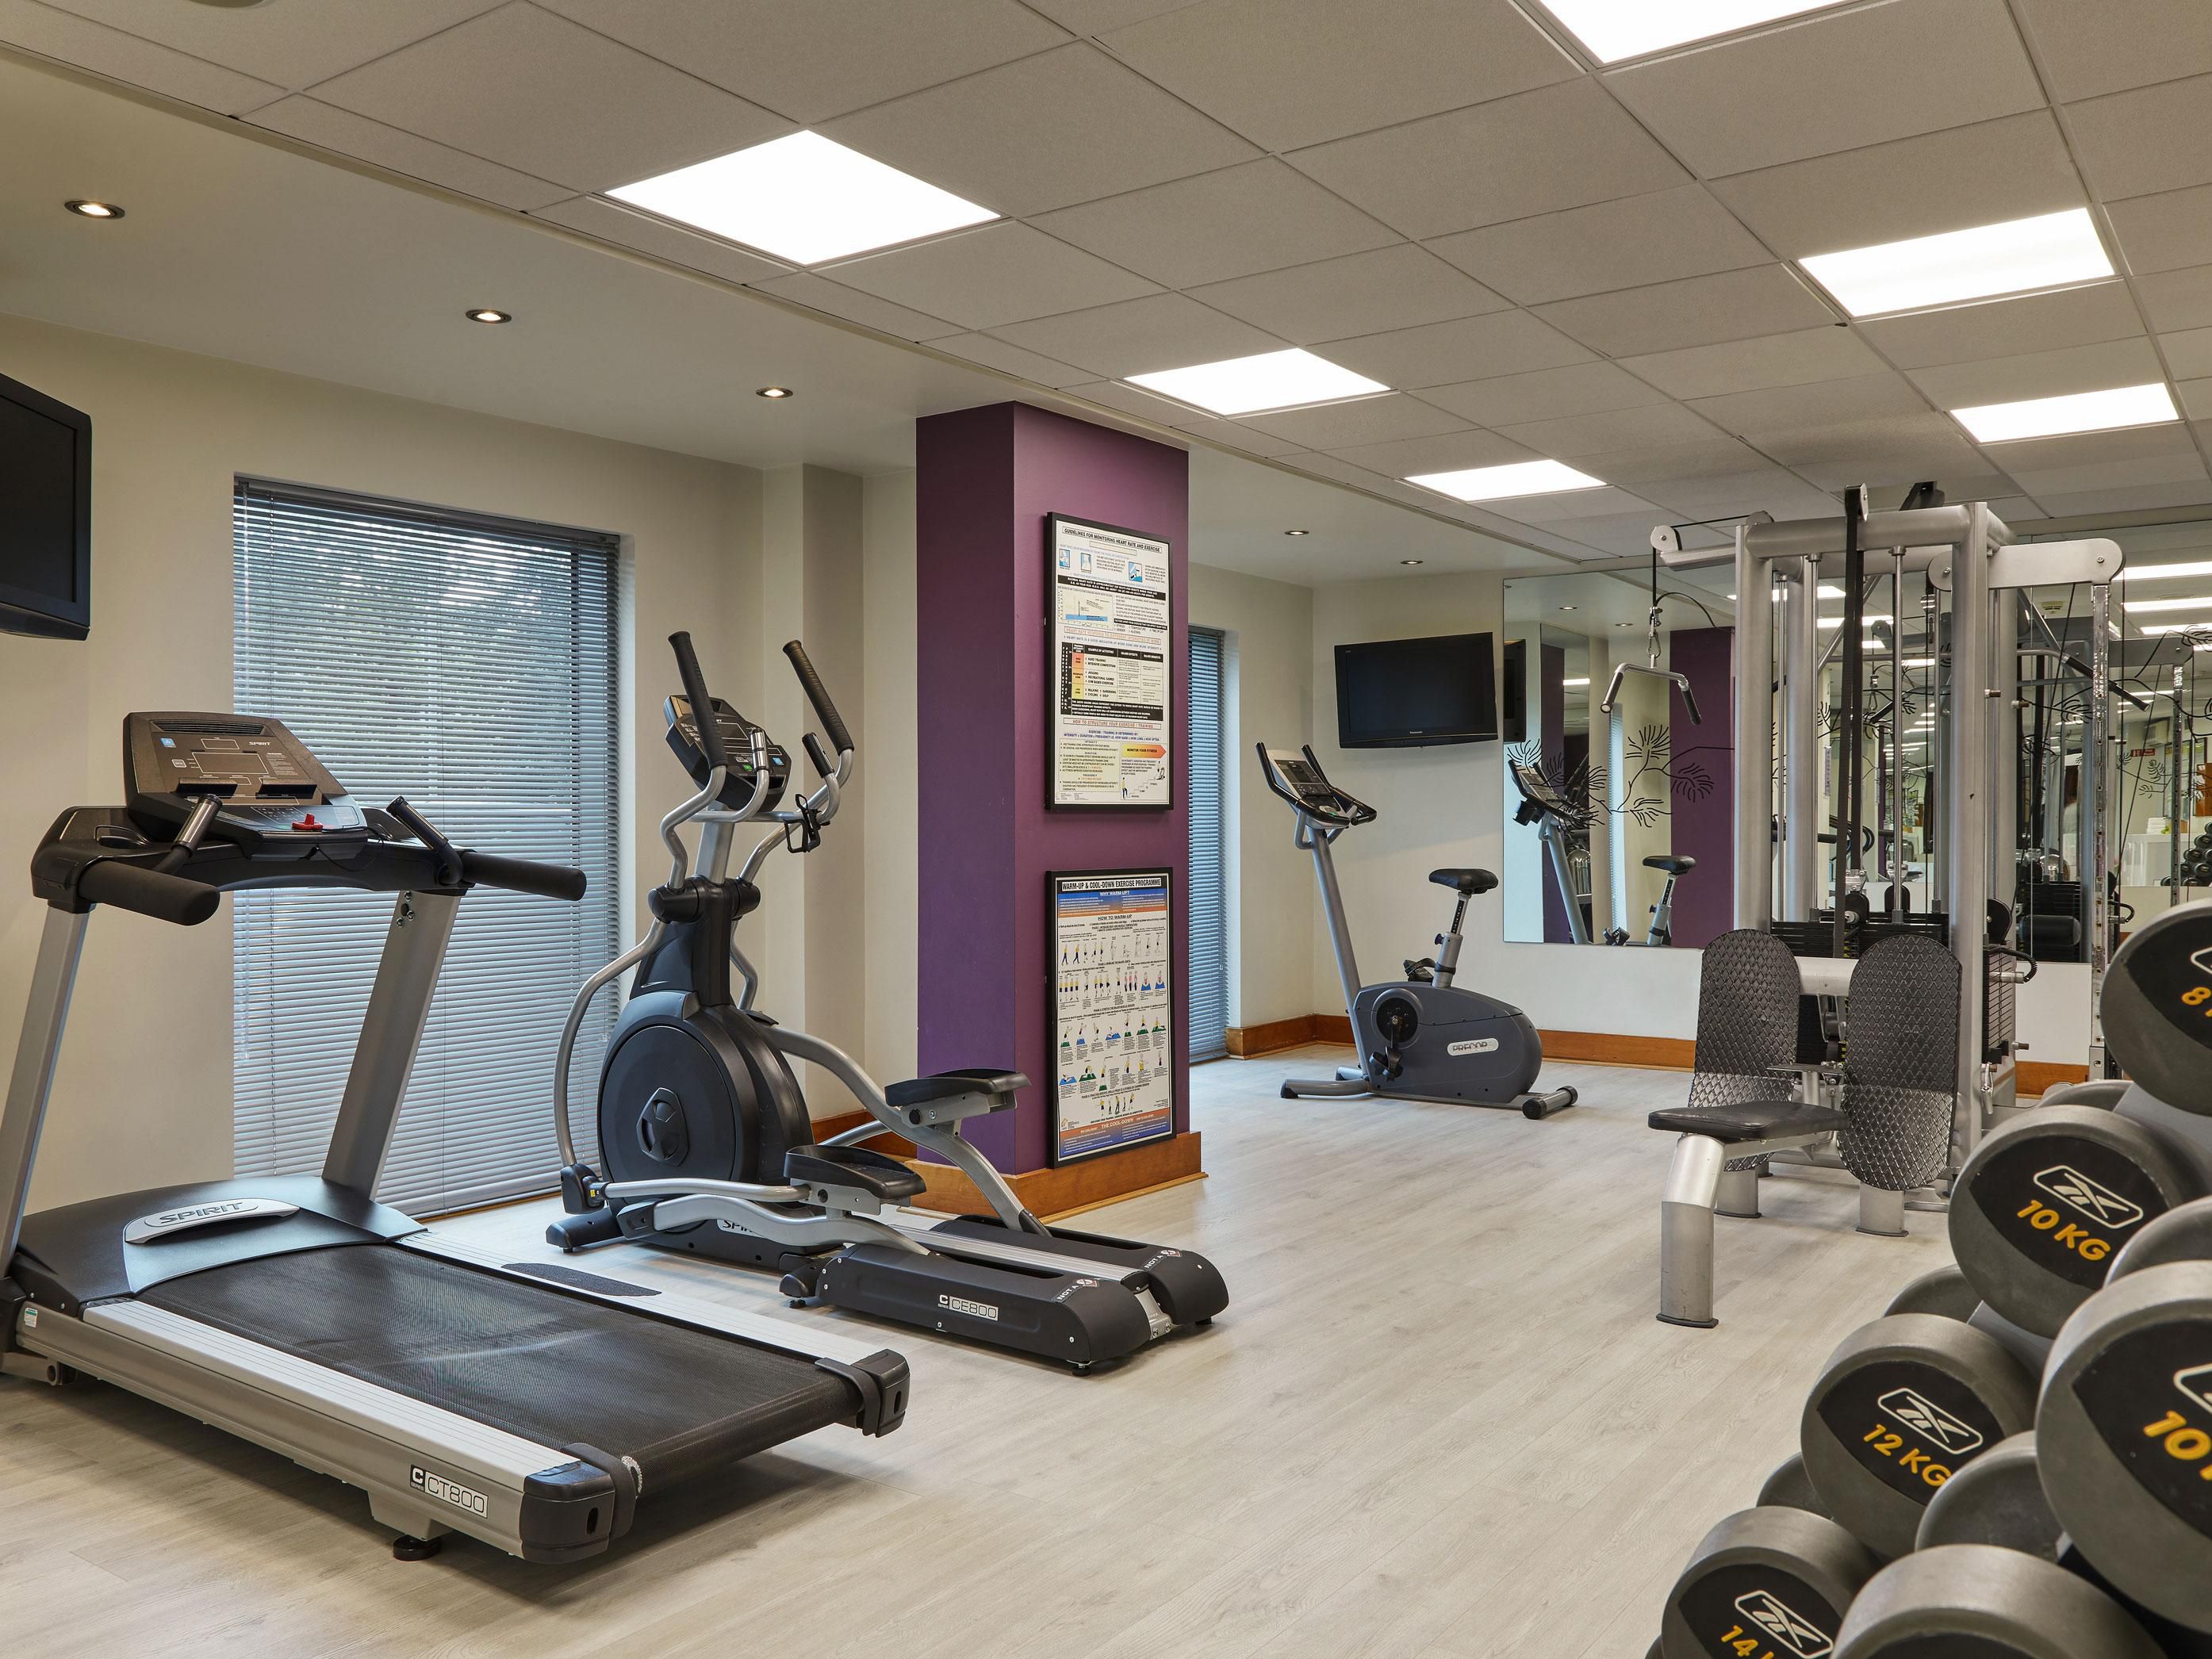 After a good night’s sleep, begin your day with an energizing workout at our Fitness Centre, open from 6am to 11pm. Keep fit and stay in shape while away from home with our modern equipment, including a stair-stepper, treadmill, rower, bicycle, and free weights. 